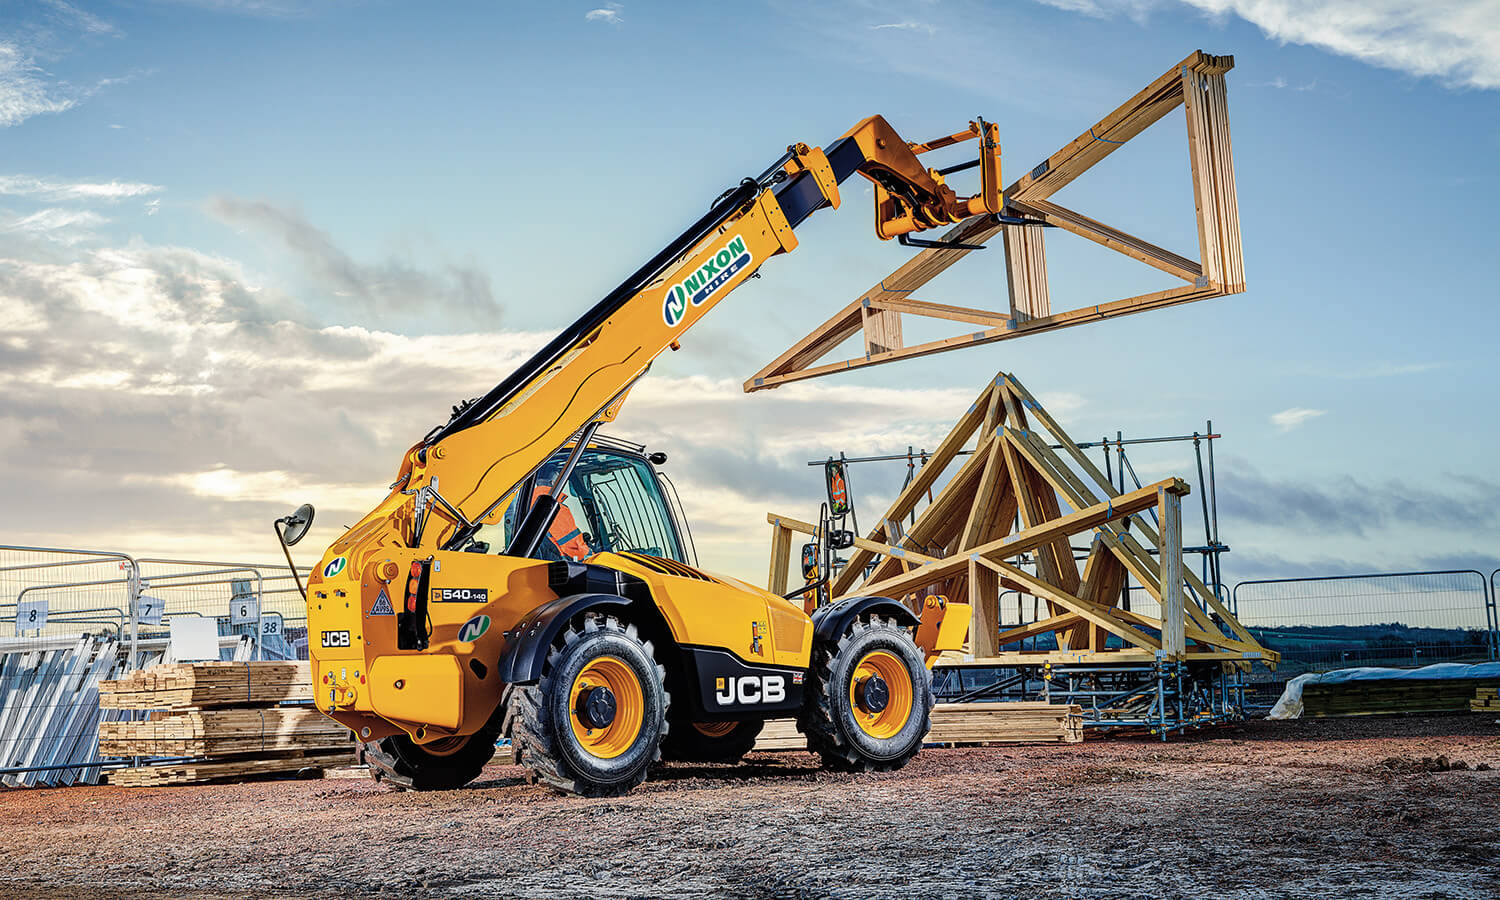 Telescopic handler is a highly manoeuvrable wheel loader with long telescopic boom making them versatile mini loaders